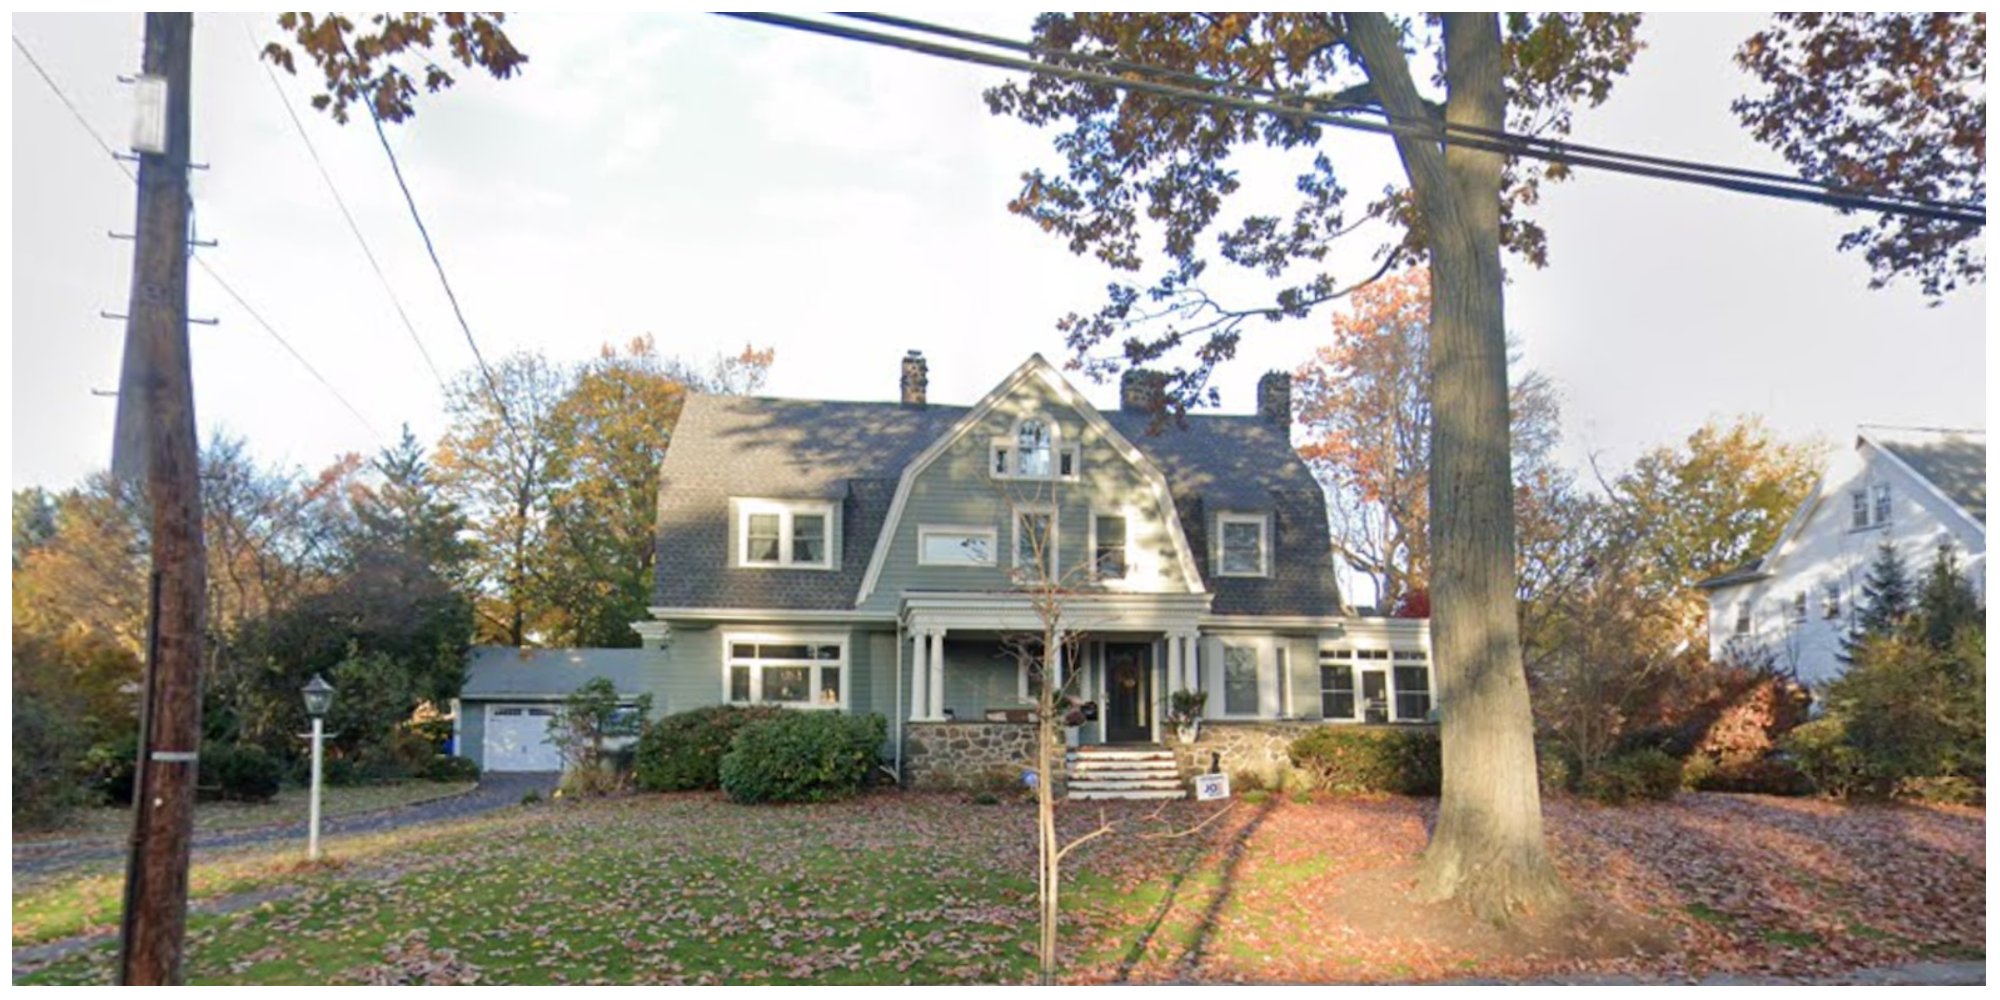 The house at 657 Boulevard in Westfield, New Jersey, which inspired the Netflix series 'The Watcher'